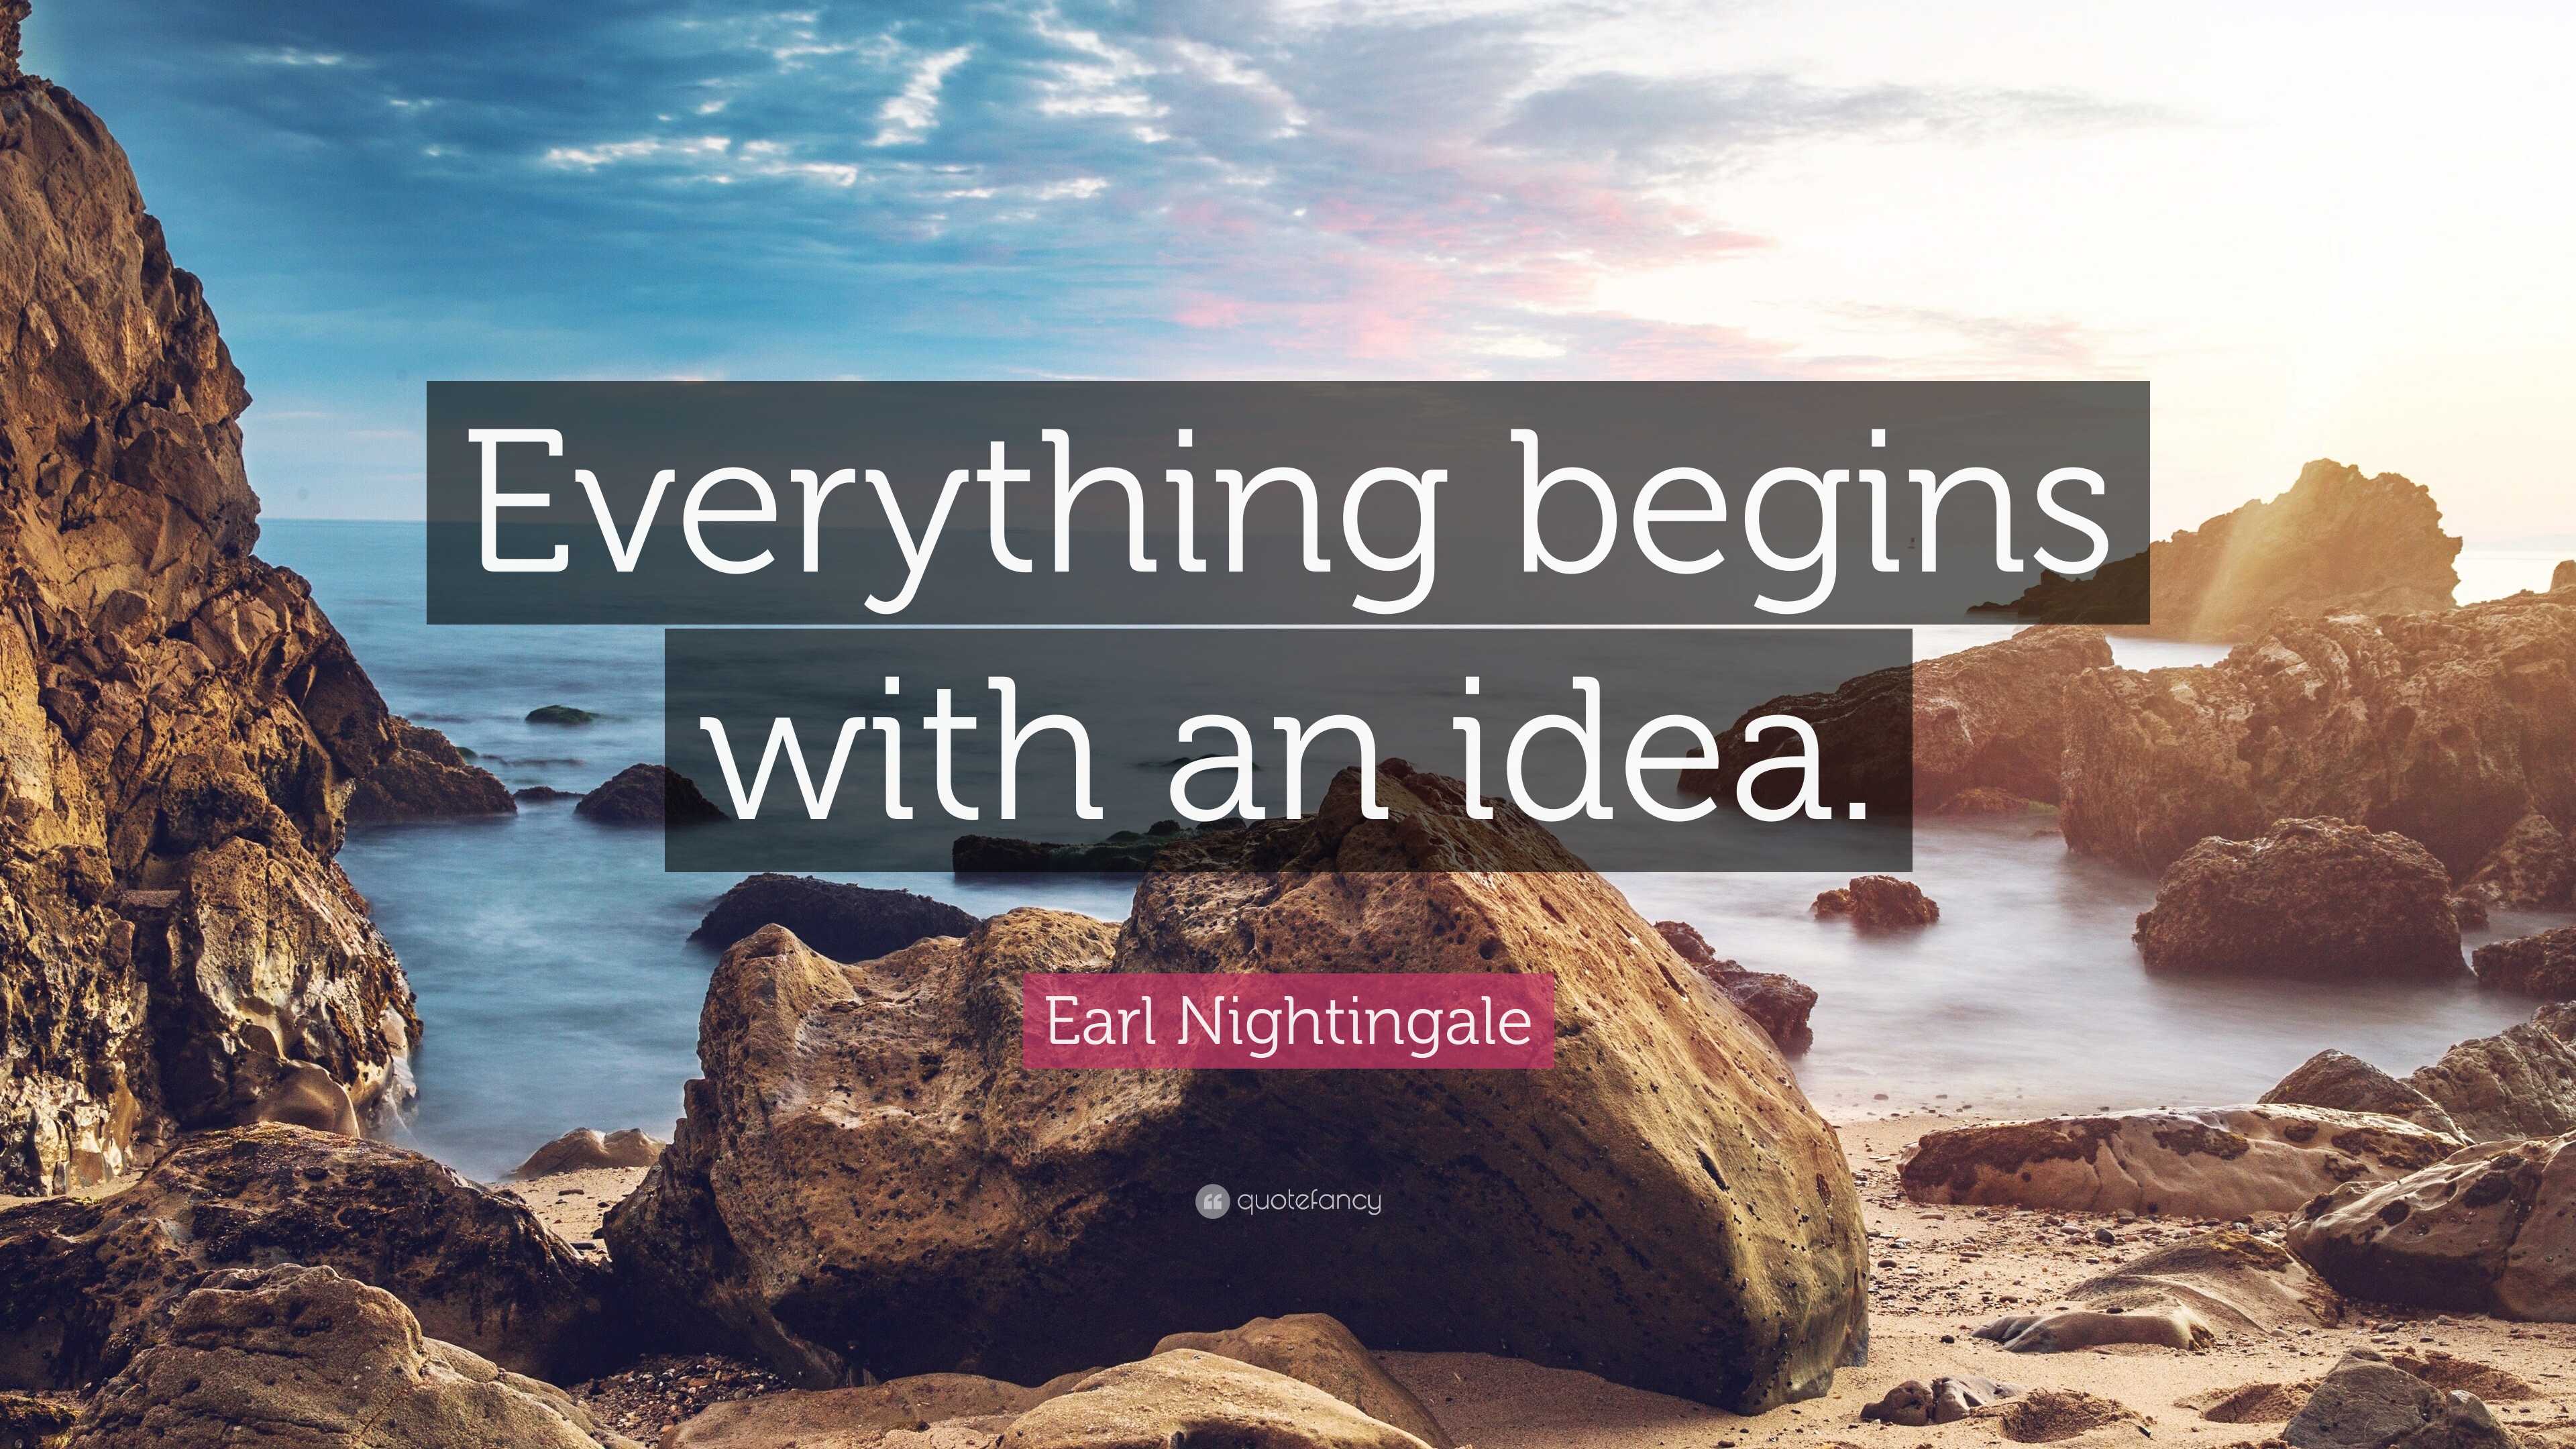 Everything begins with an idea; a simple idea can inspire